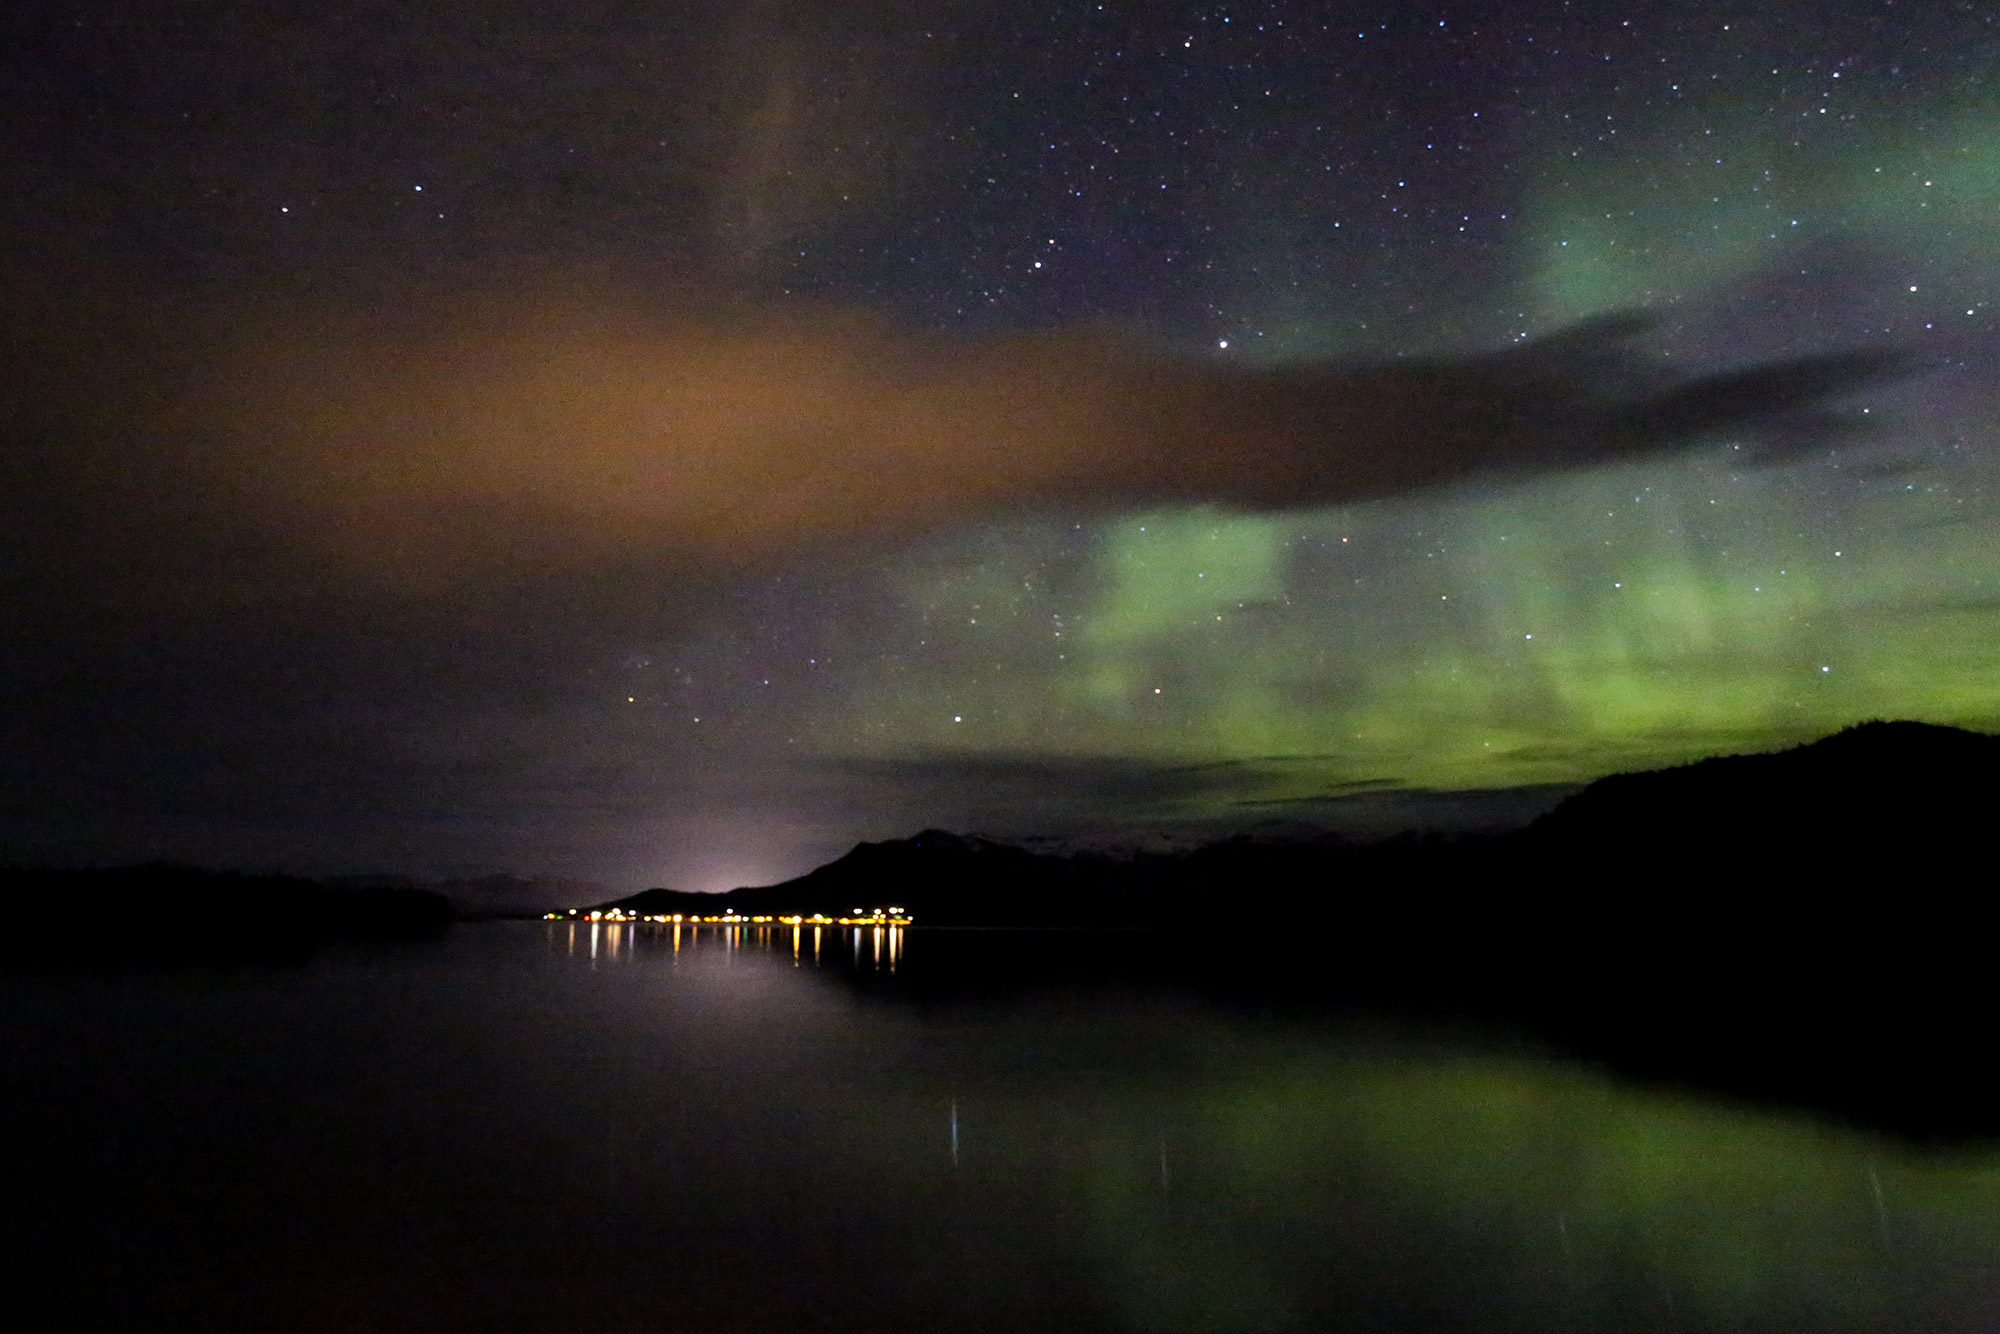 The Northern Lights shimmering over Ketchikan taken from a boat swinging at anchor